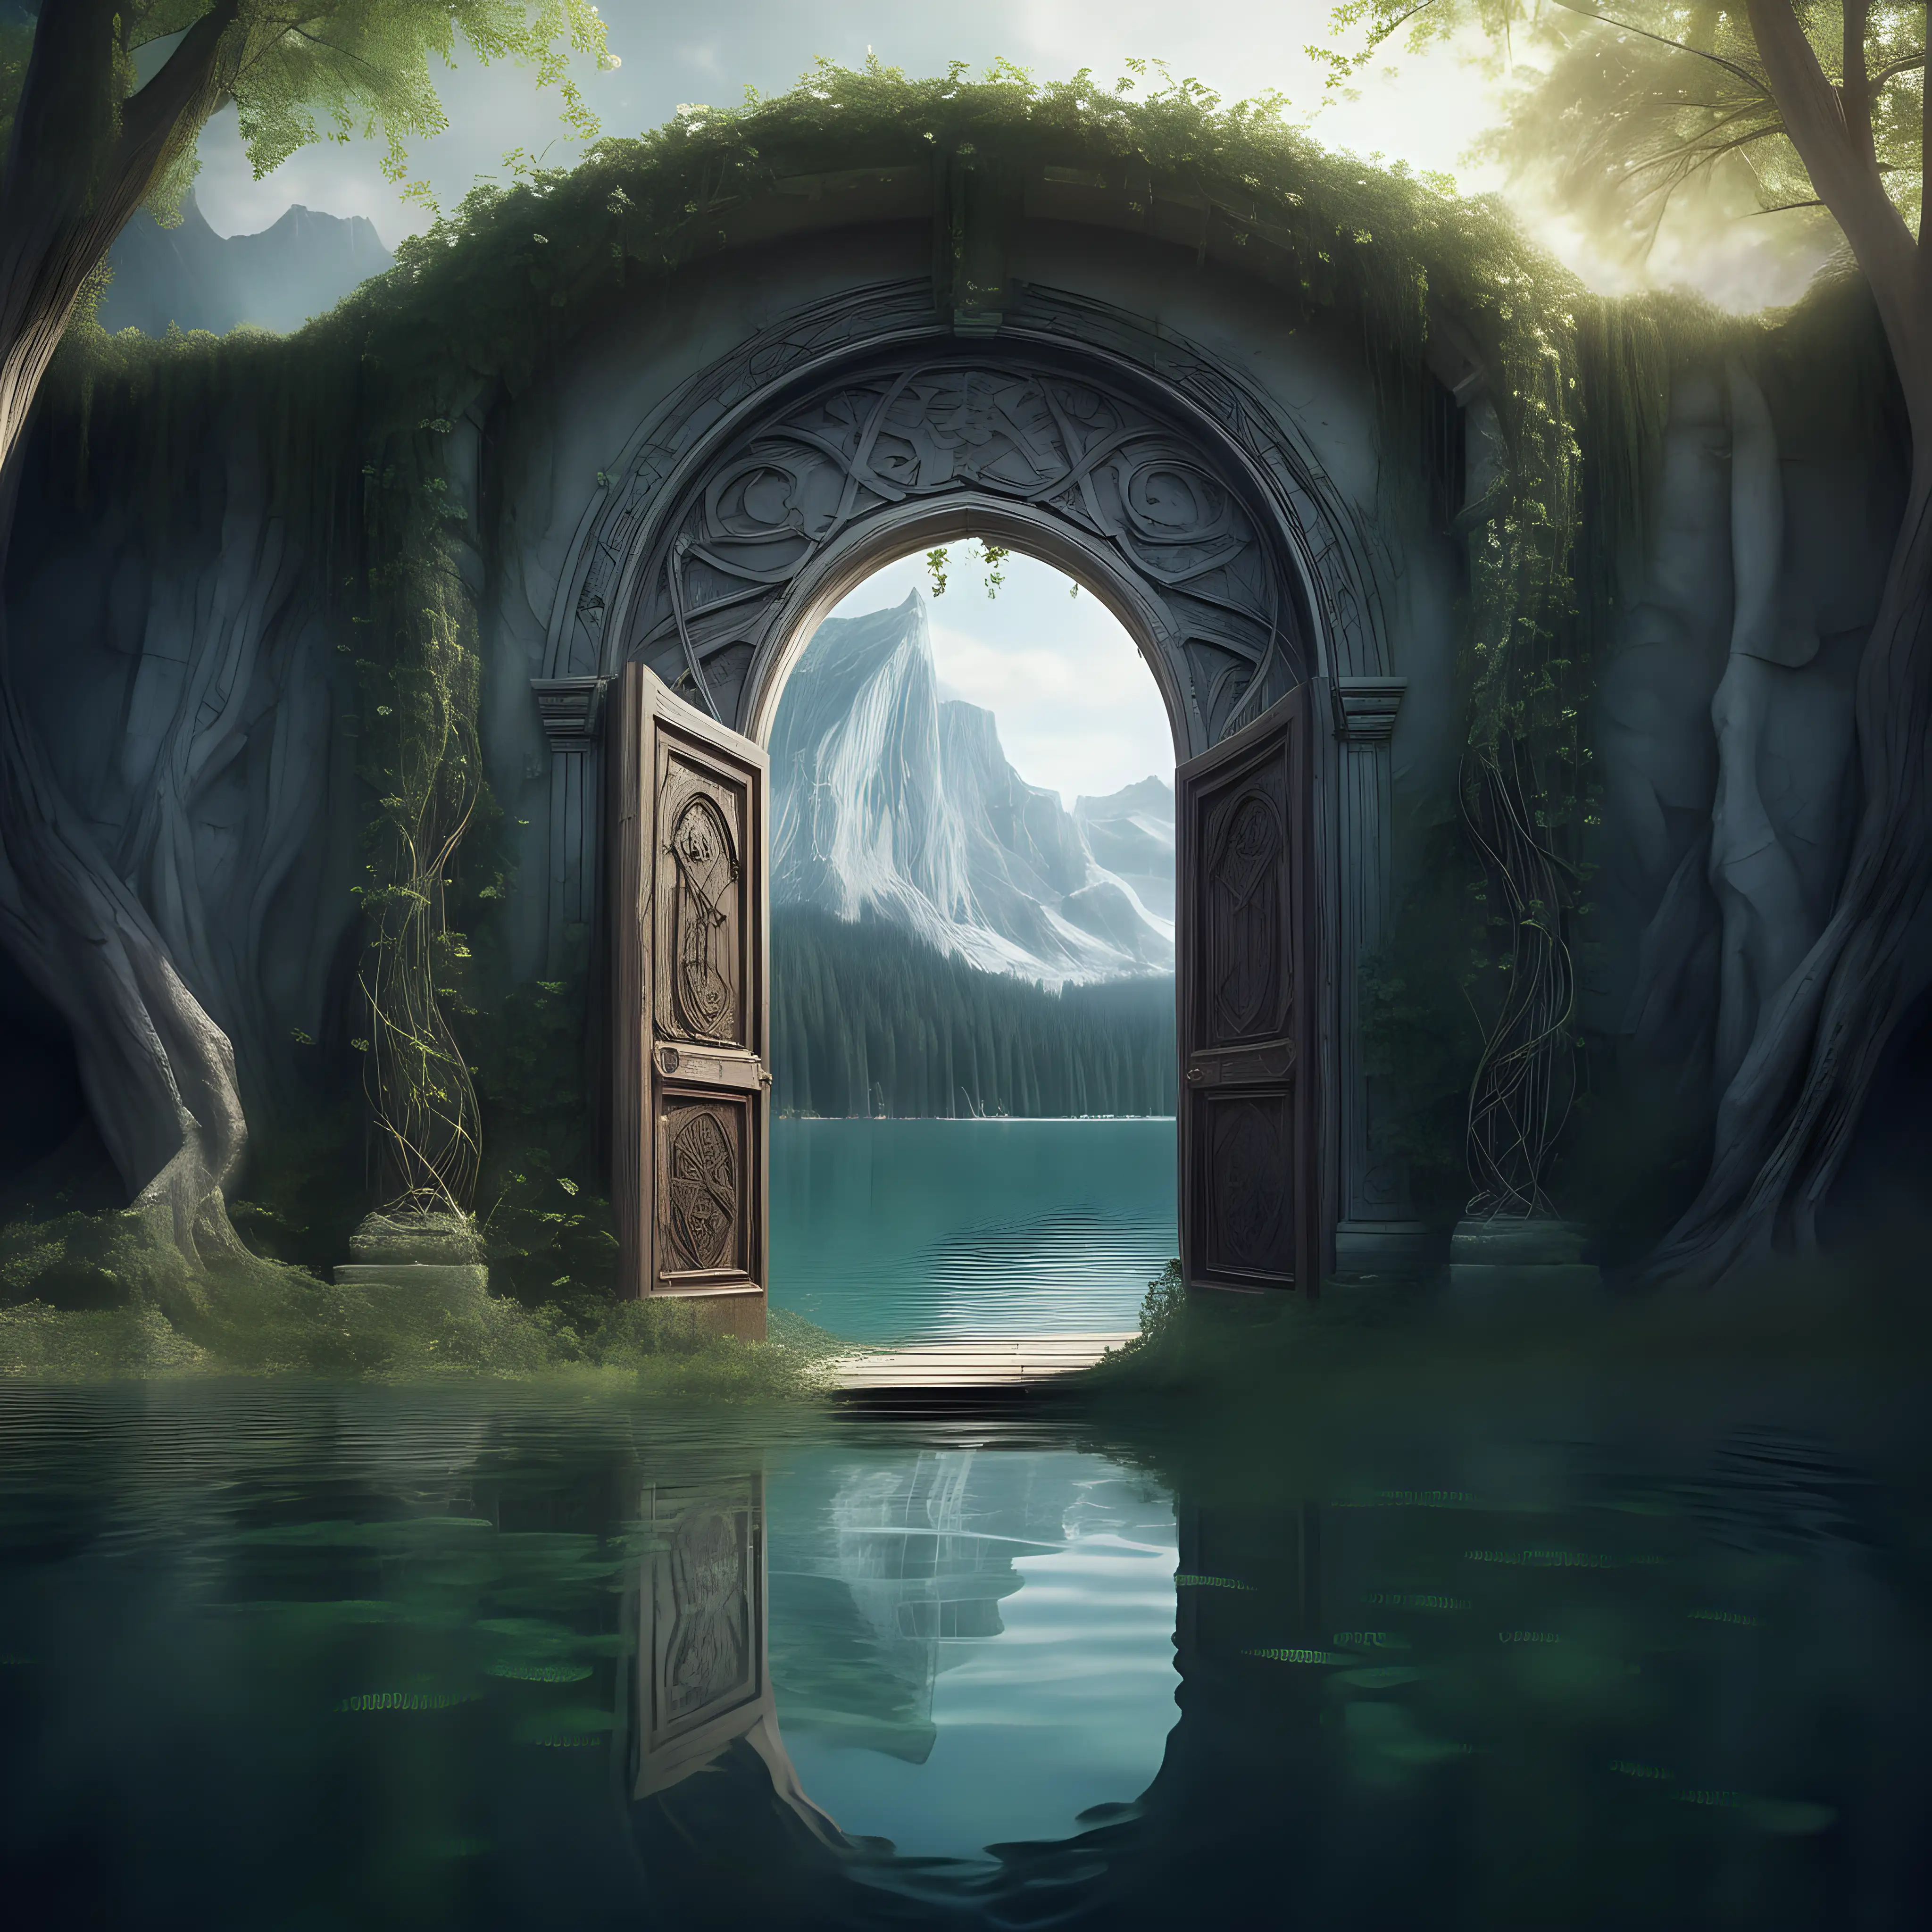 Enchanting Pathway by the Crystal Lake Mystical Doors and Ancient Mirror